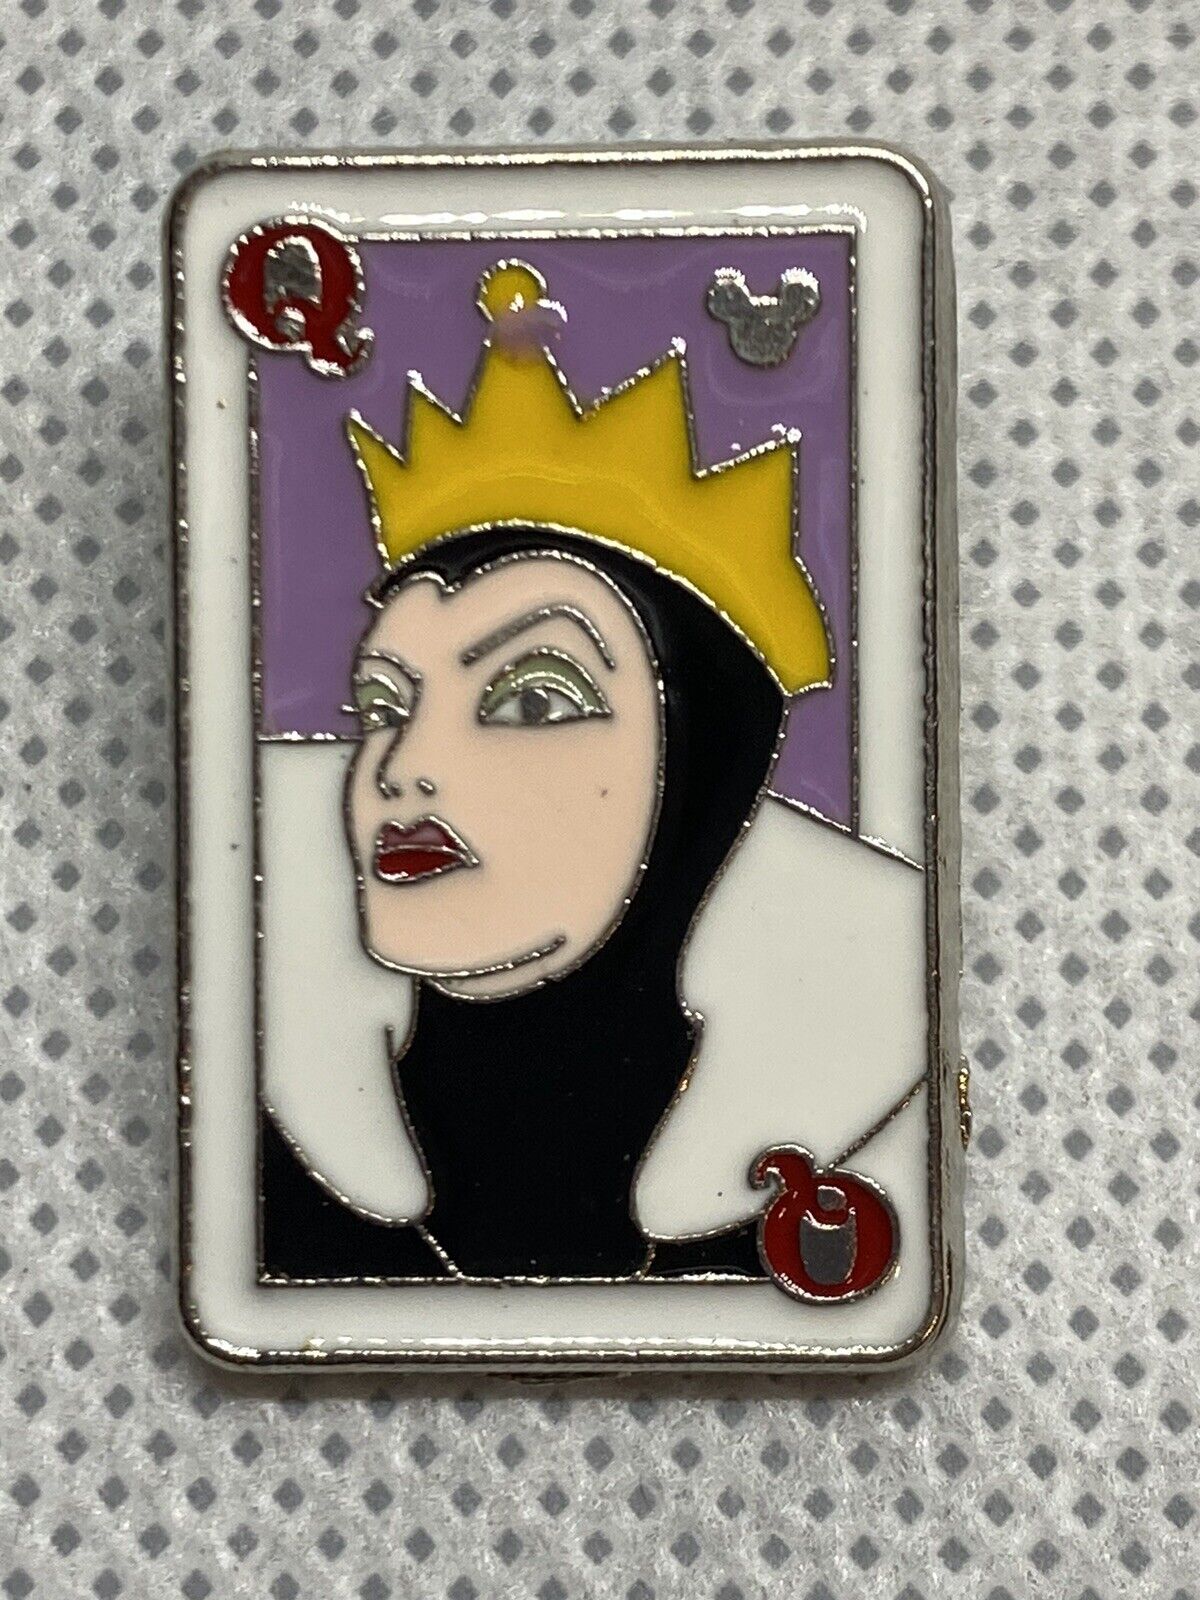 Disney Trading Pin - Evil Queen - Deck of Cards - Snow White and 7 Dwarfs